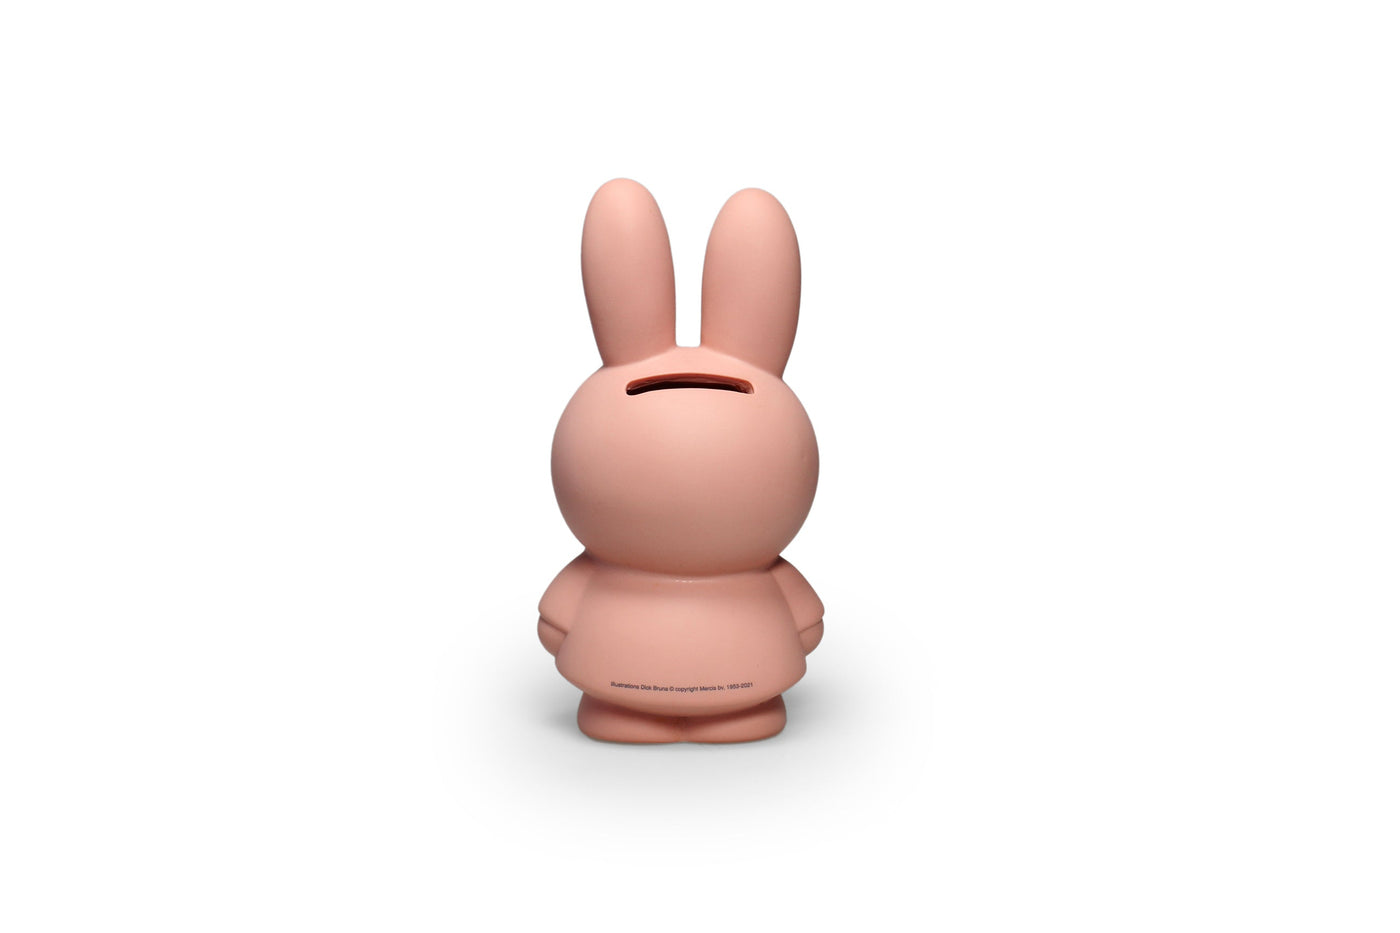 Miffy Warm Color Coin Bank